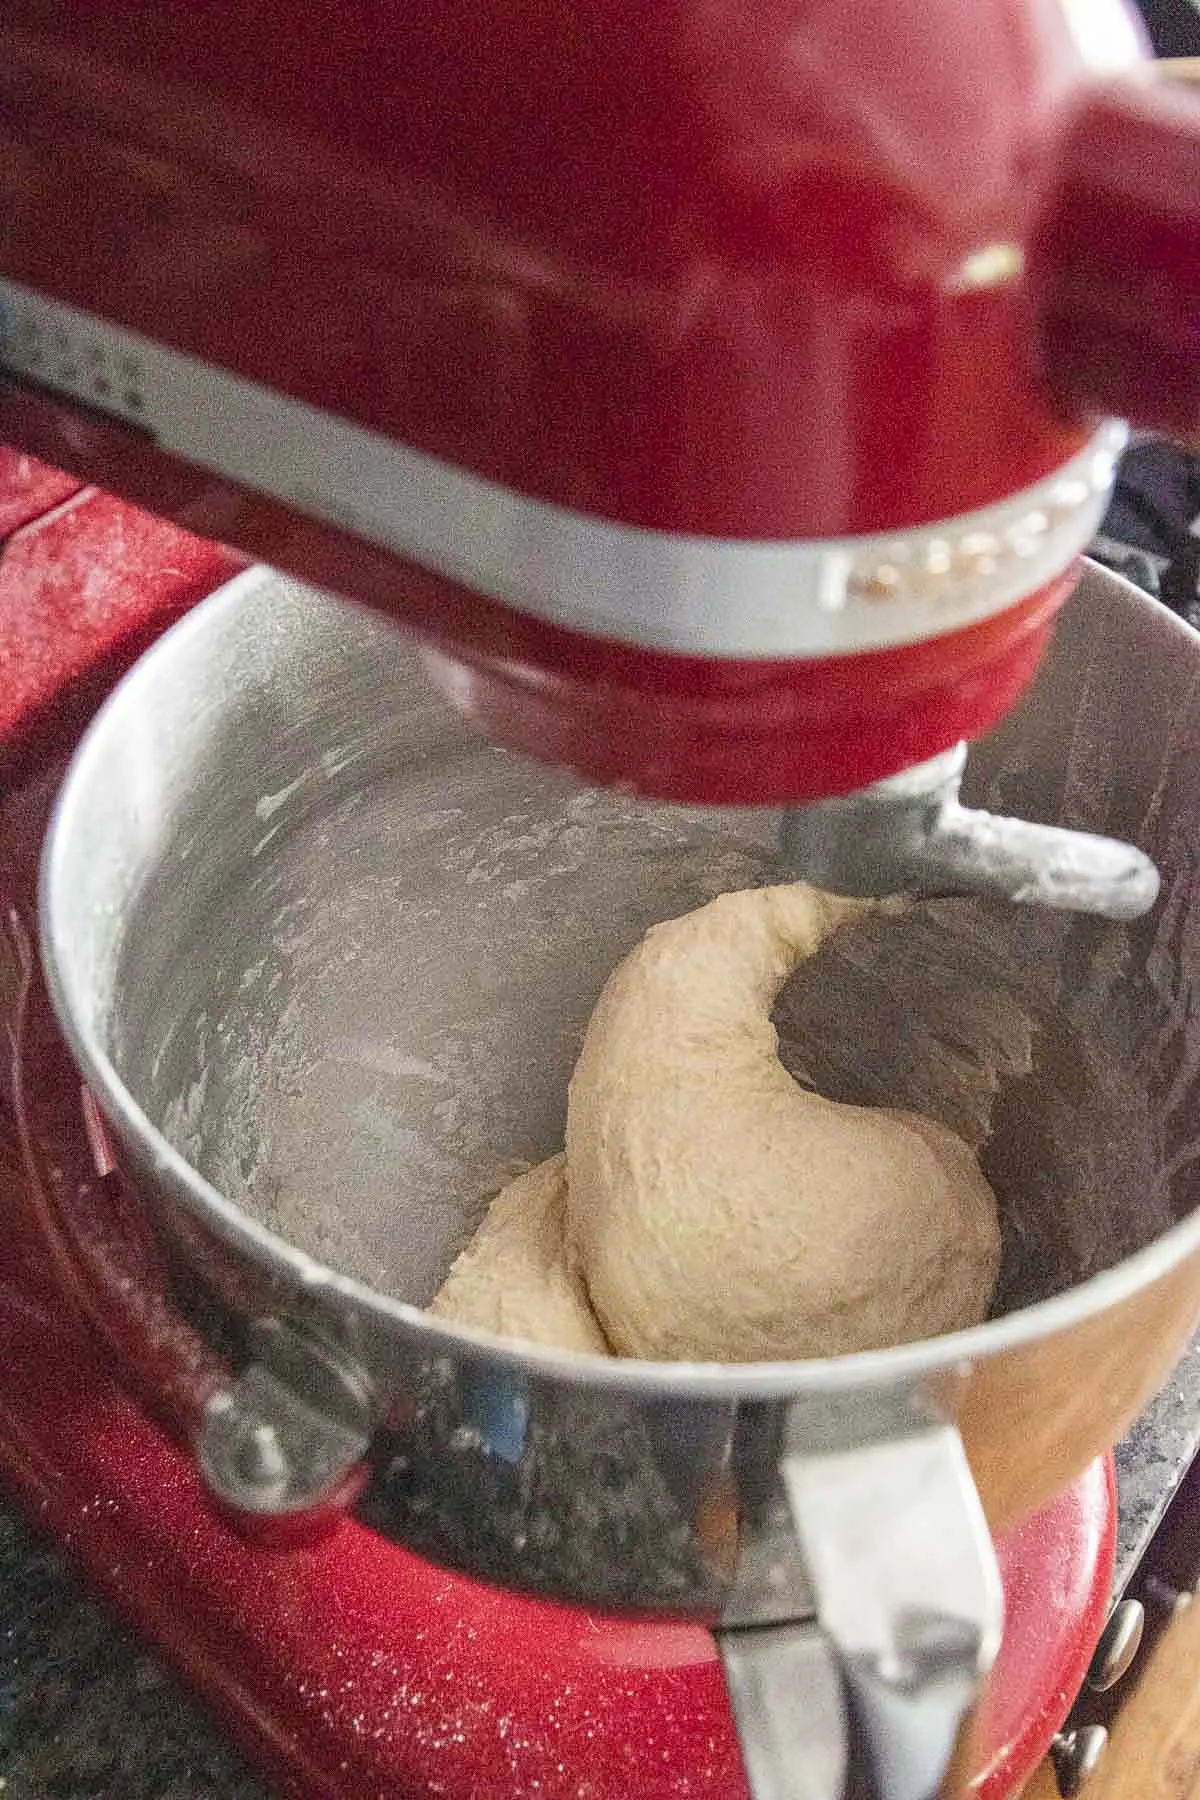 Pretzel dough at the end of kneading.